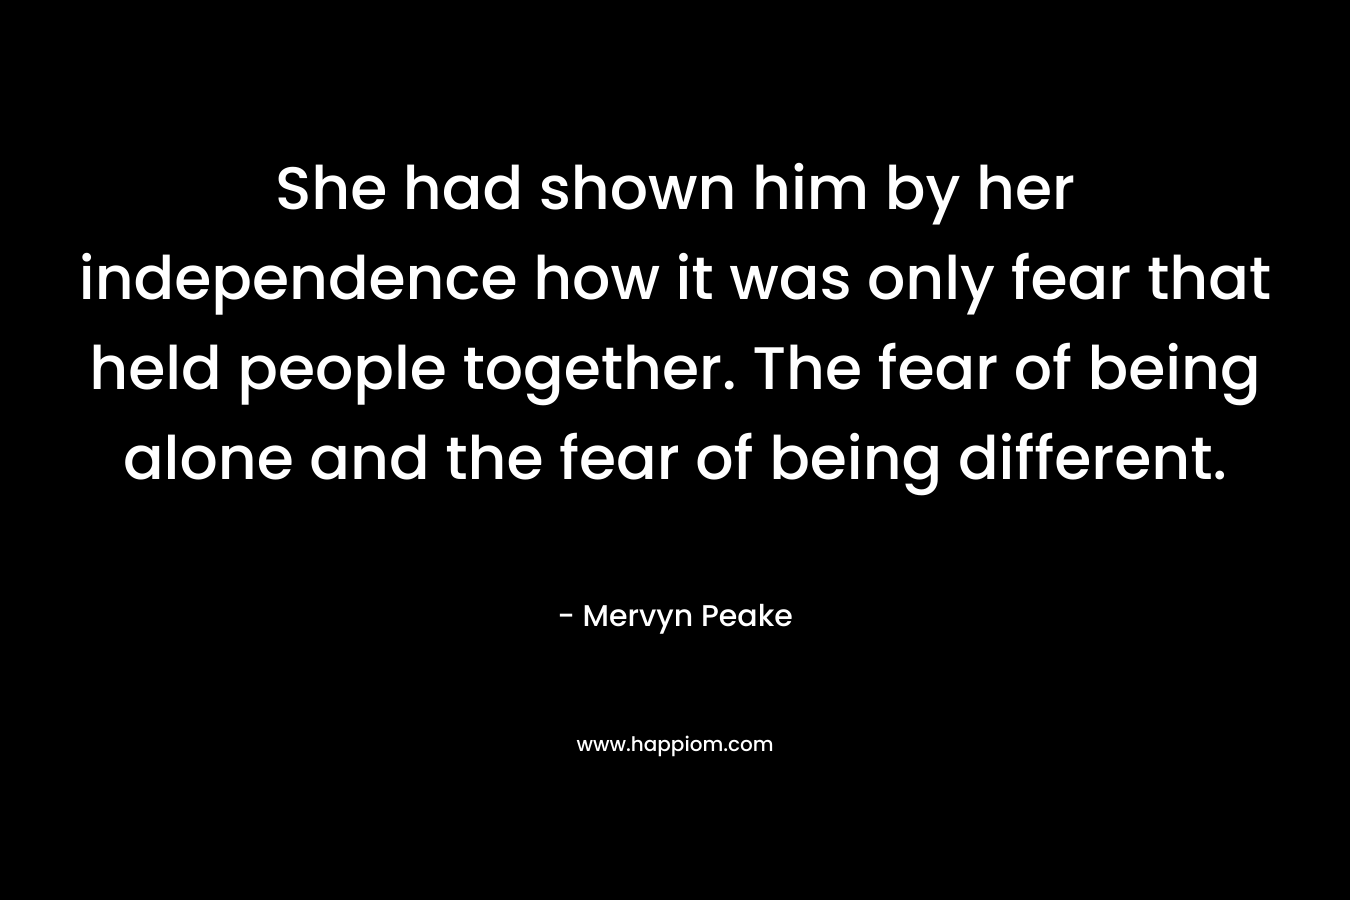 She had shown him by her independence how it was only fear that held people together. The fear of being alone and the fear of being different. – Mervyn Peake